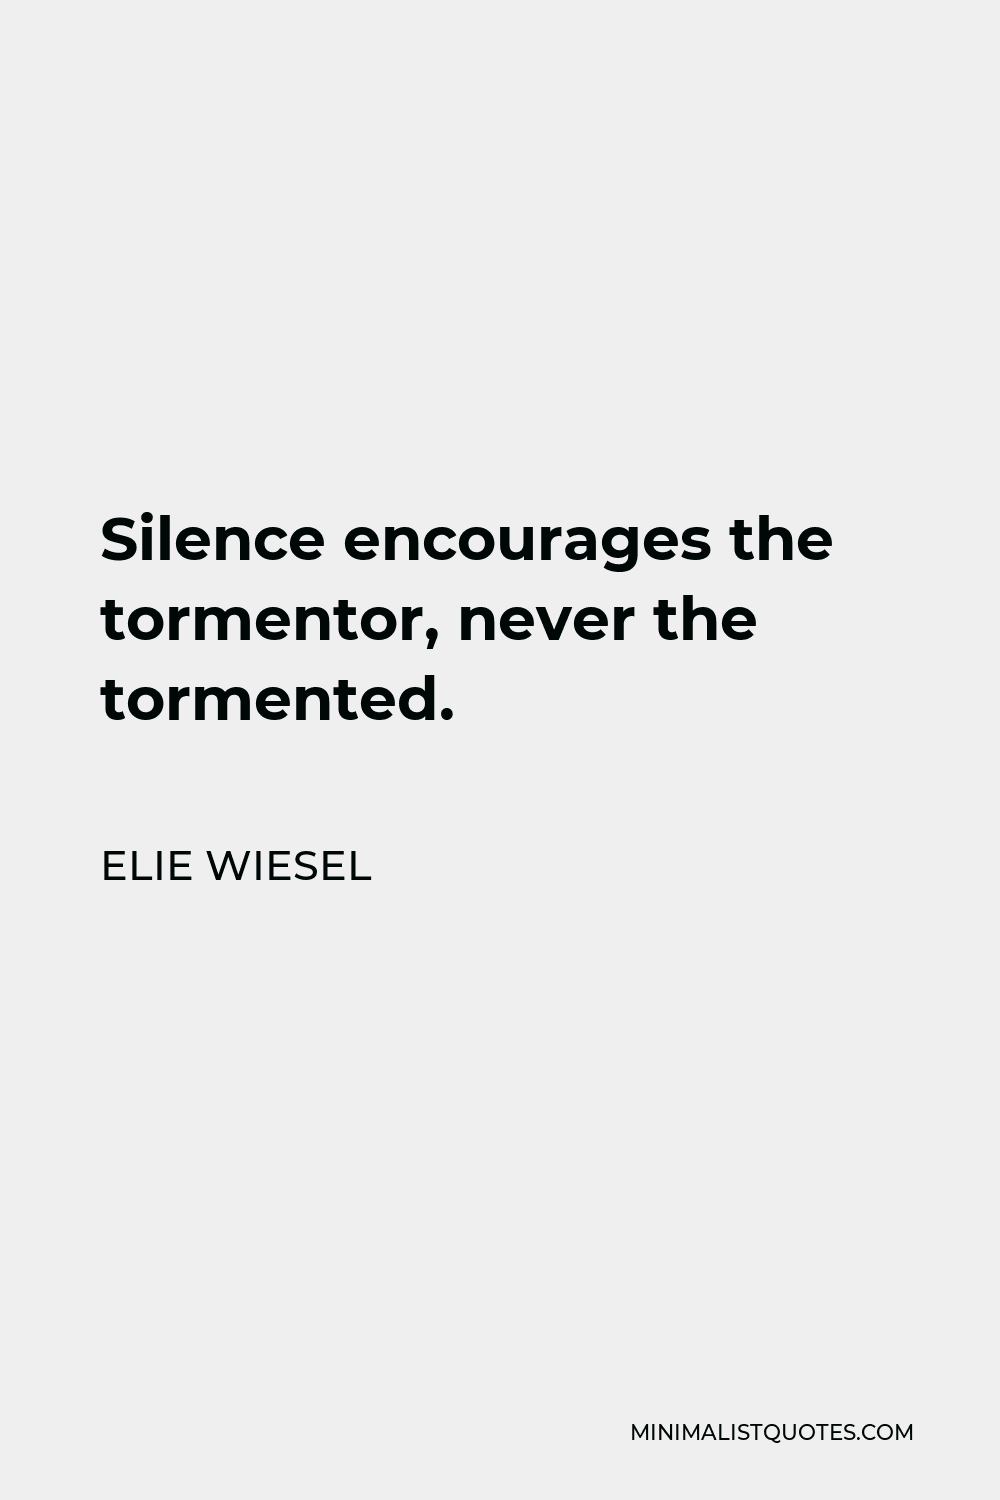 Elie Wiesel Quote - Silence encourages the tormentor, never the tormented.